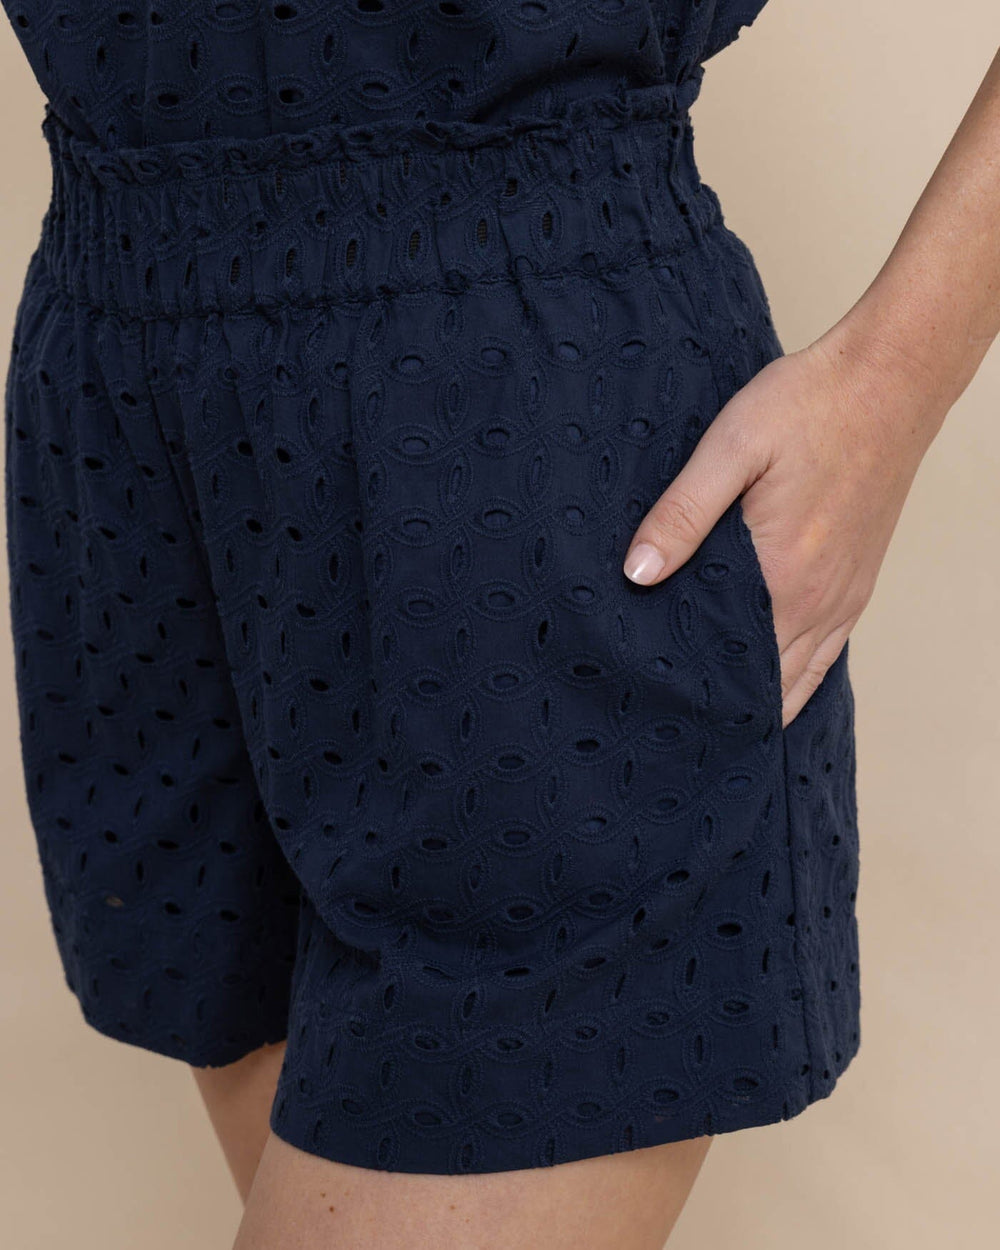 The front view of the Southern Tide Elyse Eyelet Short by Southern Tide - Dress Blue